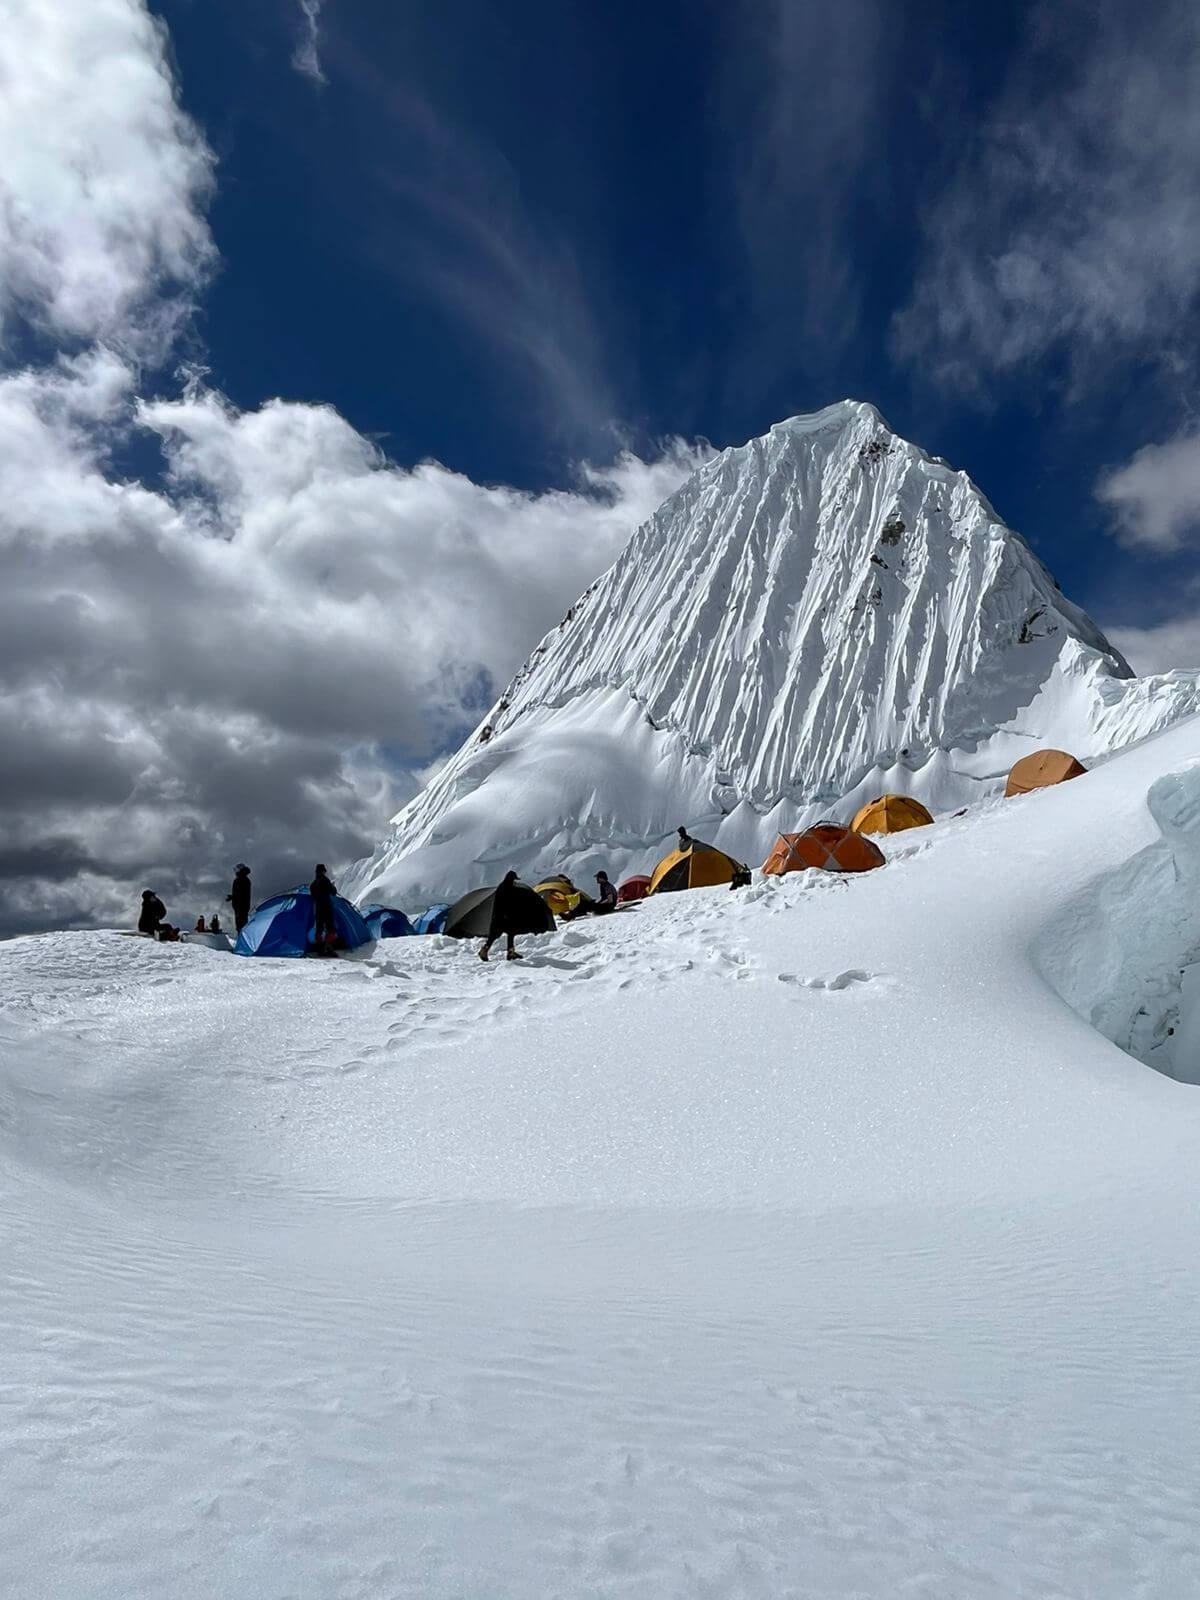 The view of Alpamayo, a large white pyramid of a mountain, from a snow field below. 